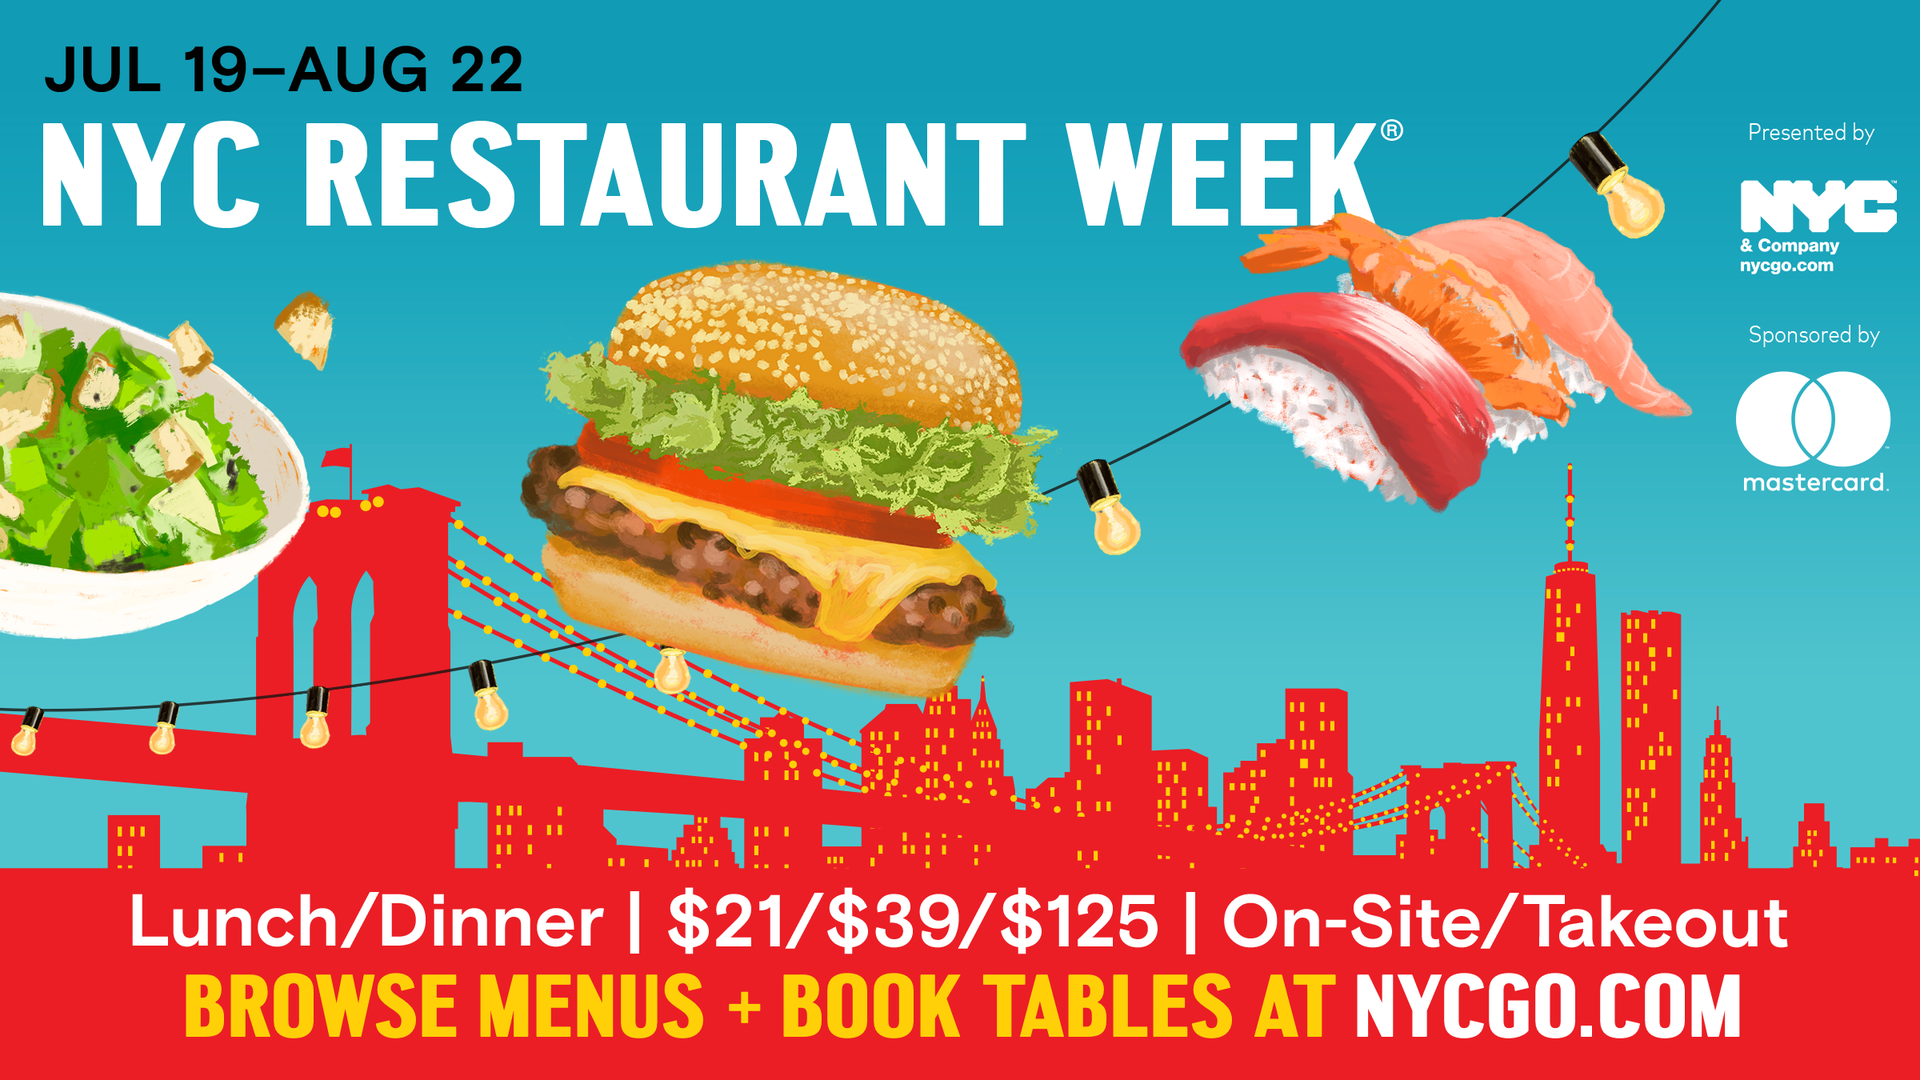 NYC Restaurant Week is back — and Mastercard cardholders can save each